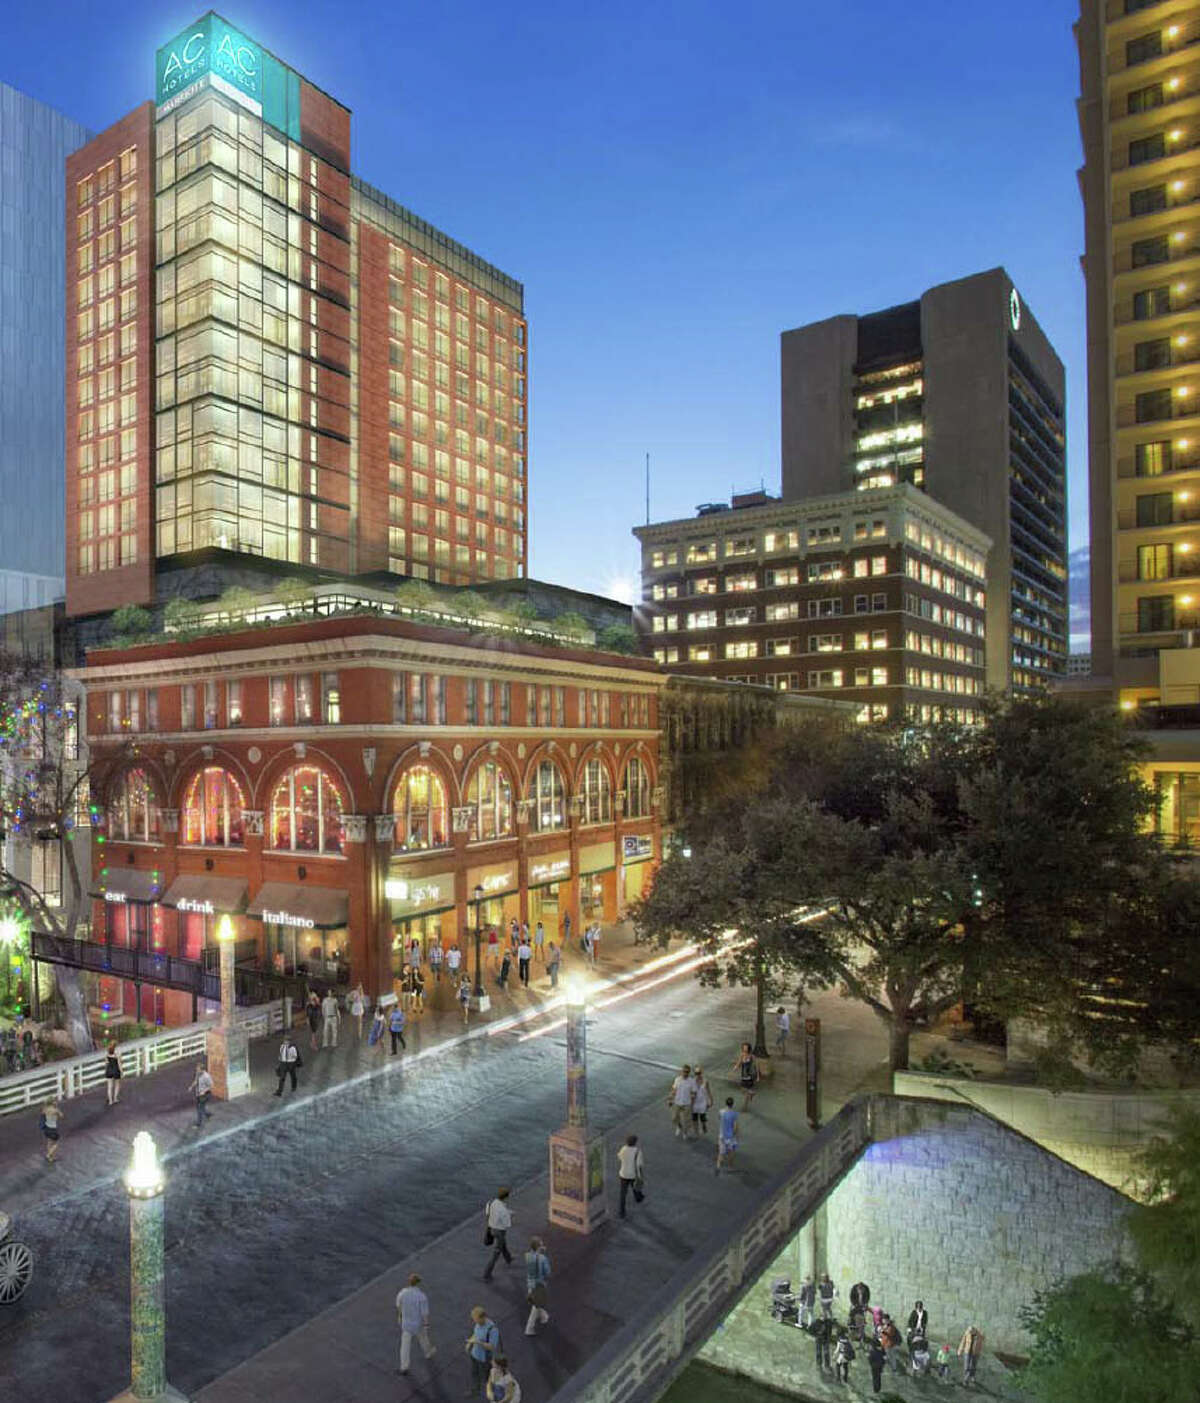 A 252-room AC Hotel by Marriott is being introduced for much of the River Walk block between Houston and Commerce streets. A handful of buildings, including the former Solo Serve department store, would be razed or partially demolished to make room for the new development.